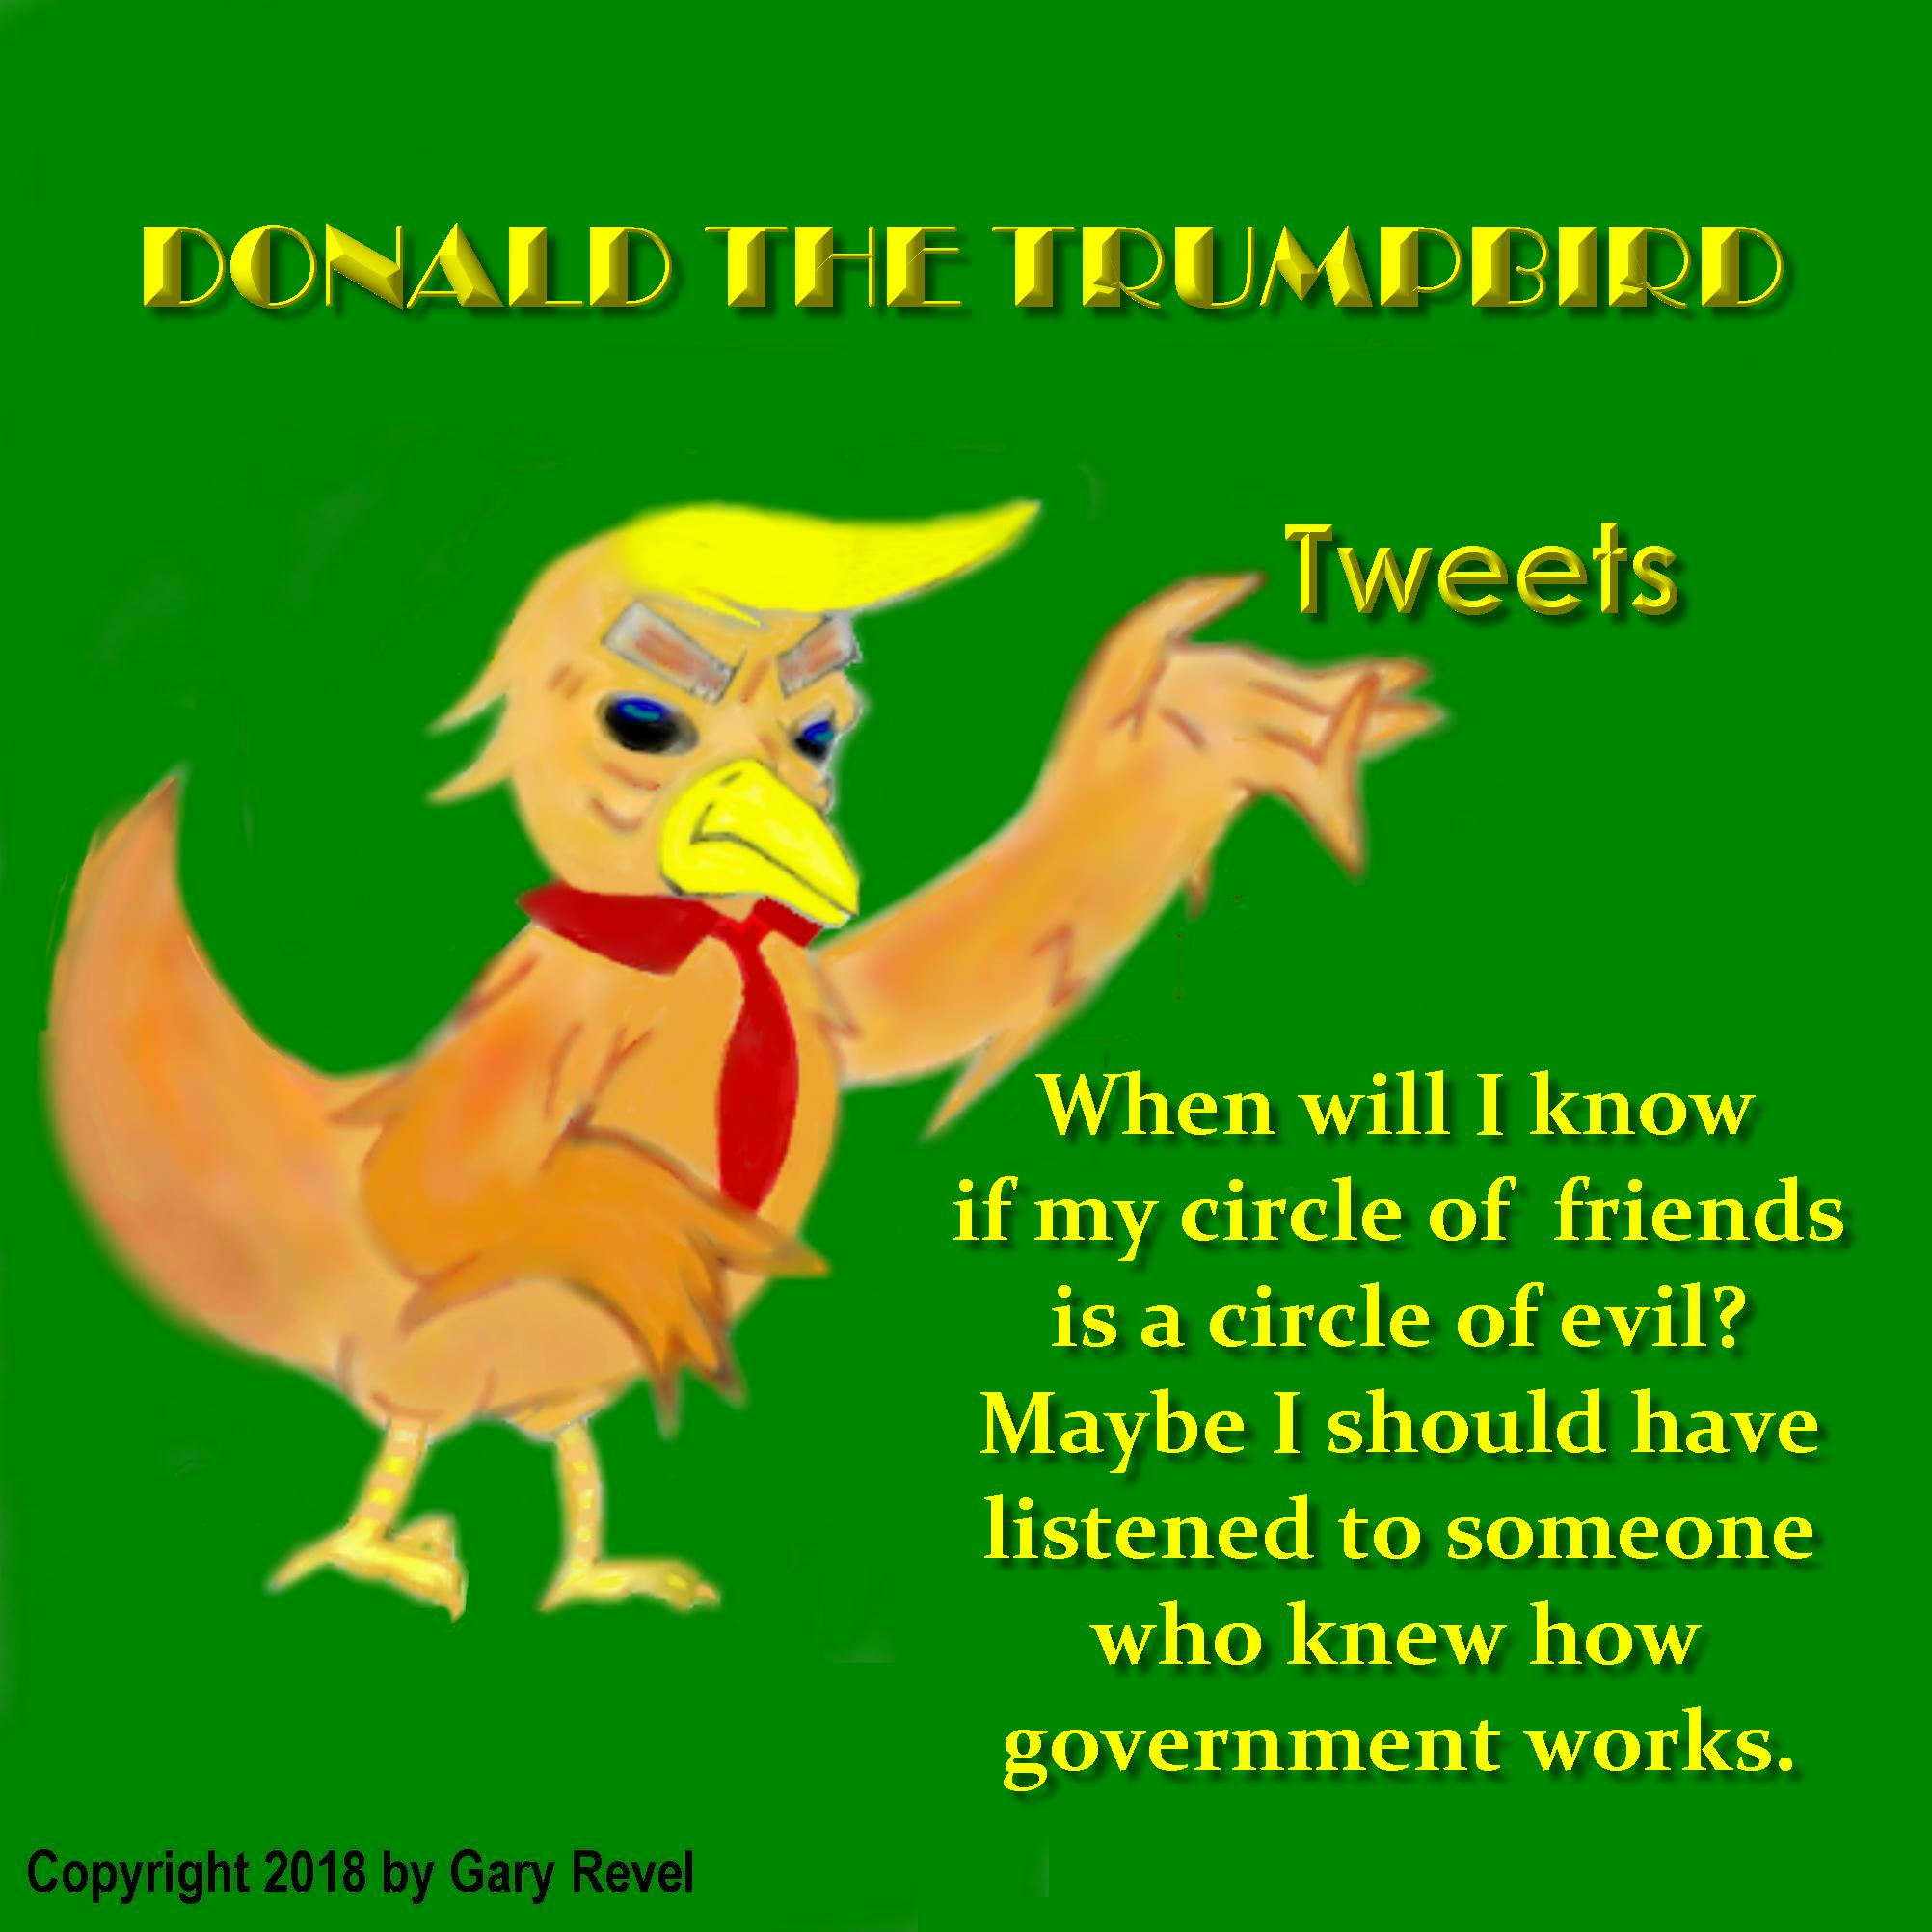 Donald the Trumpbird tweets are they the circle of evil